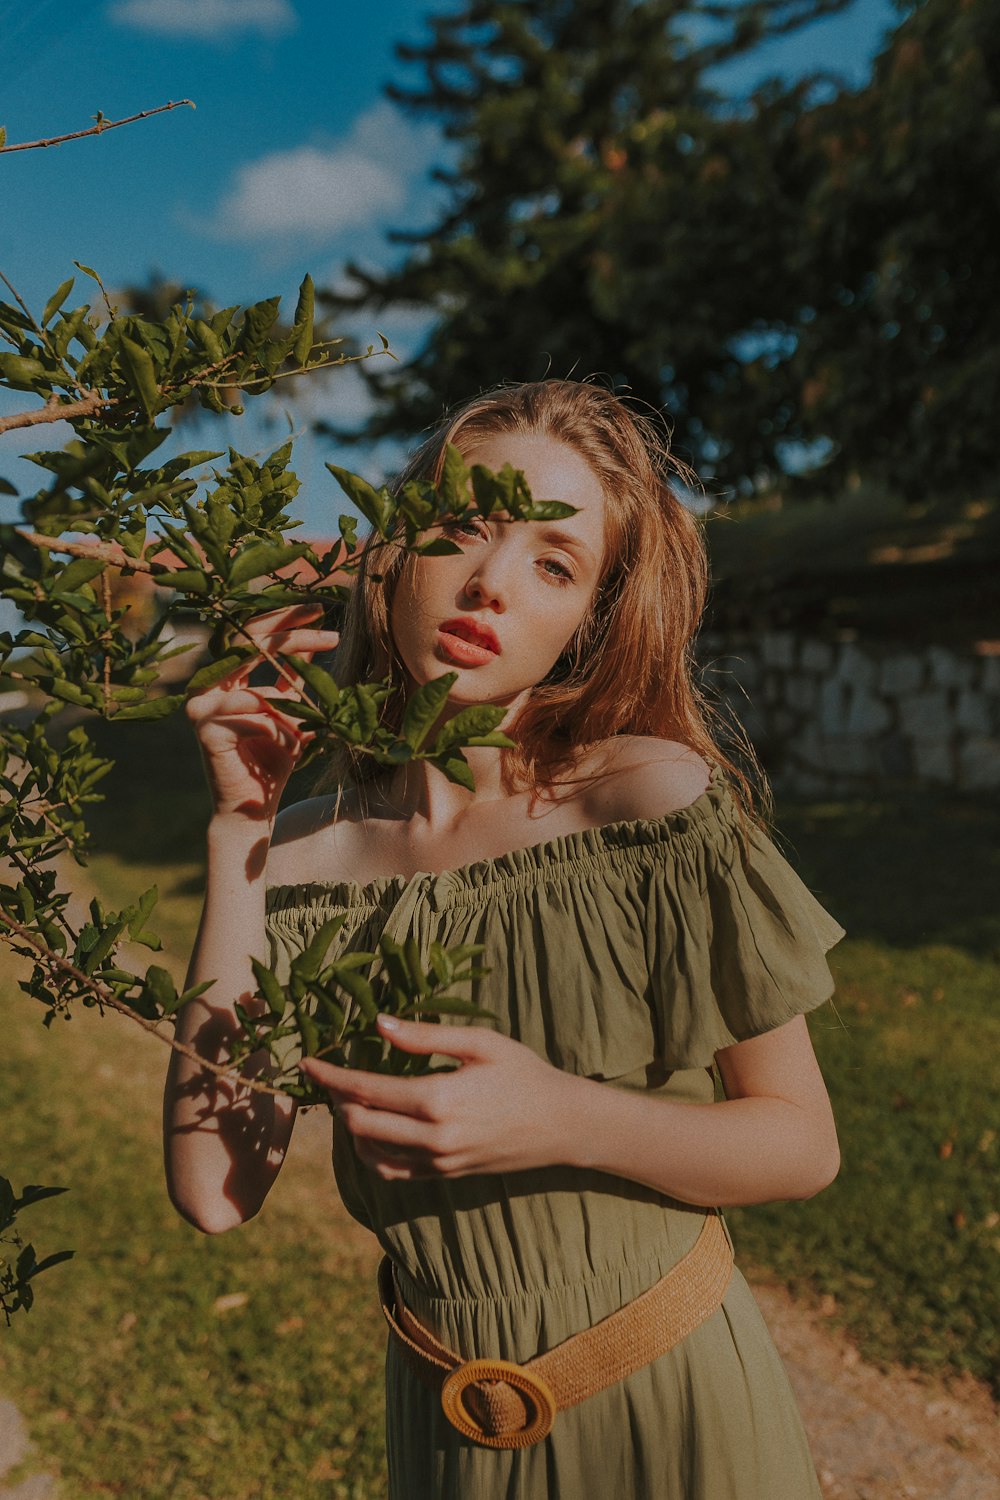 woman in green off-shoulder dress standing beside green leafed plant